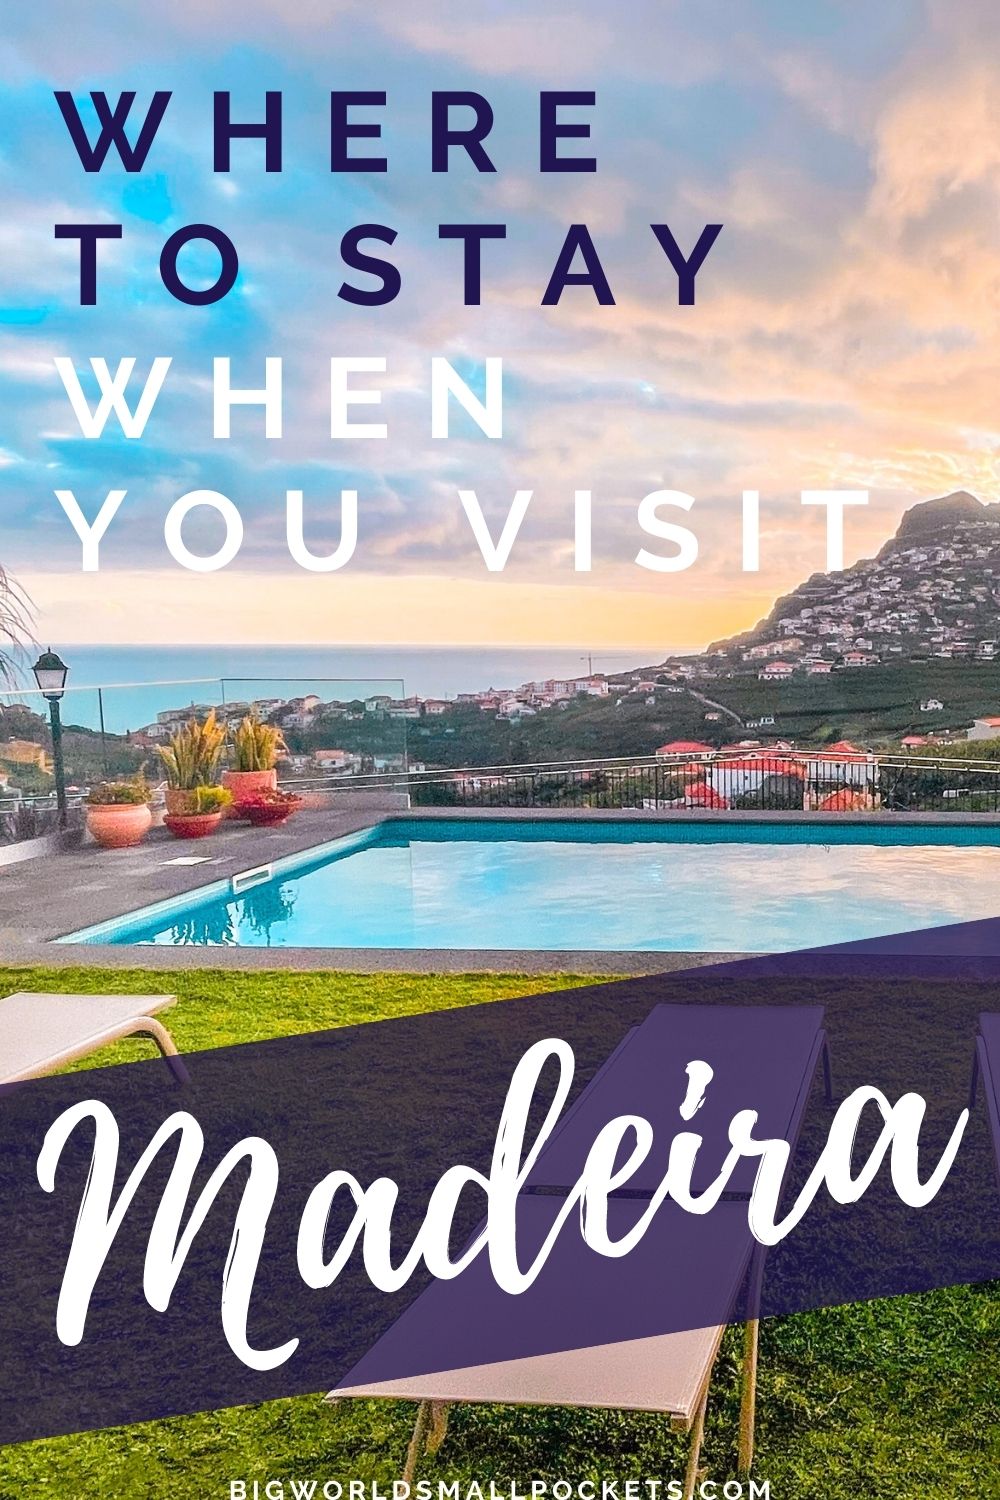 Where to Stay When you Visit Madeira